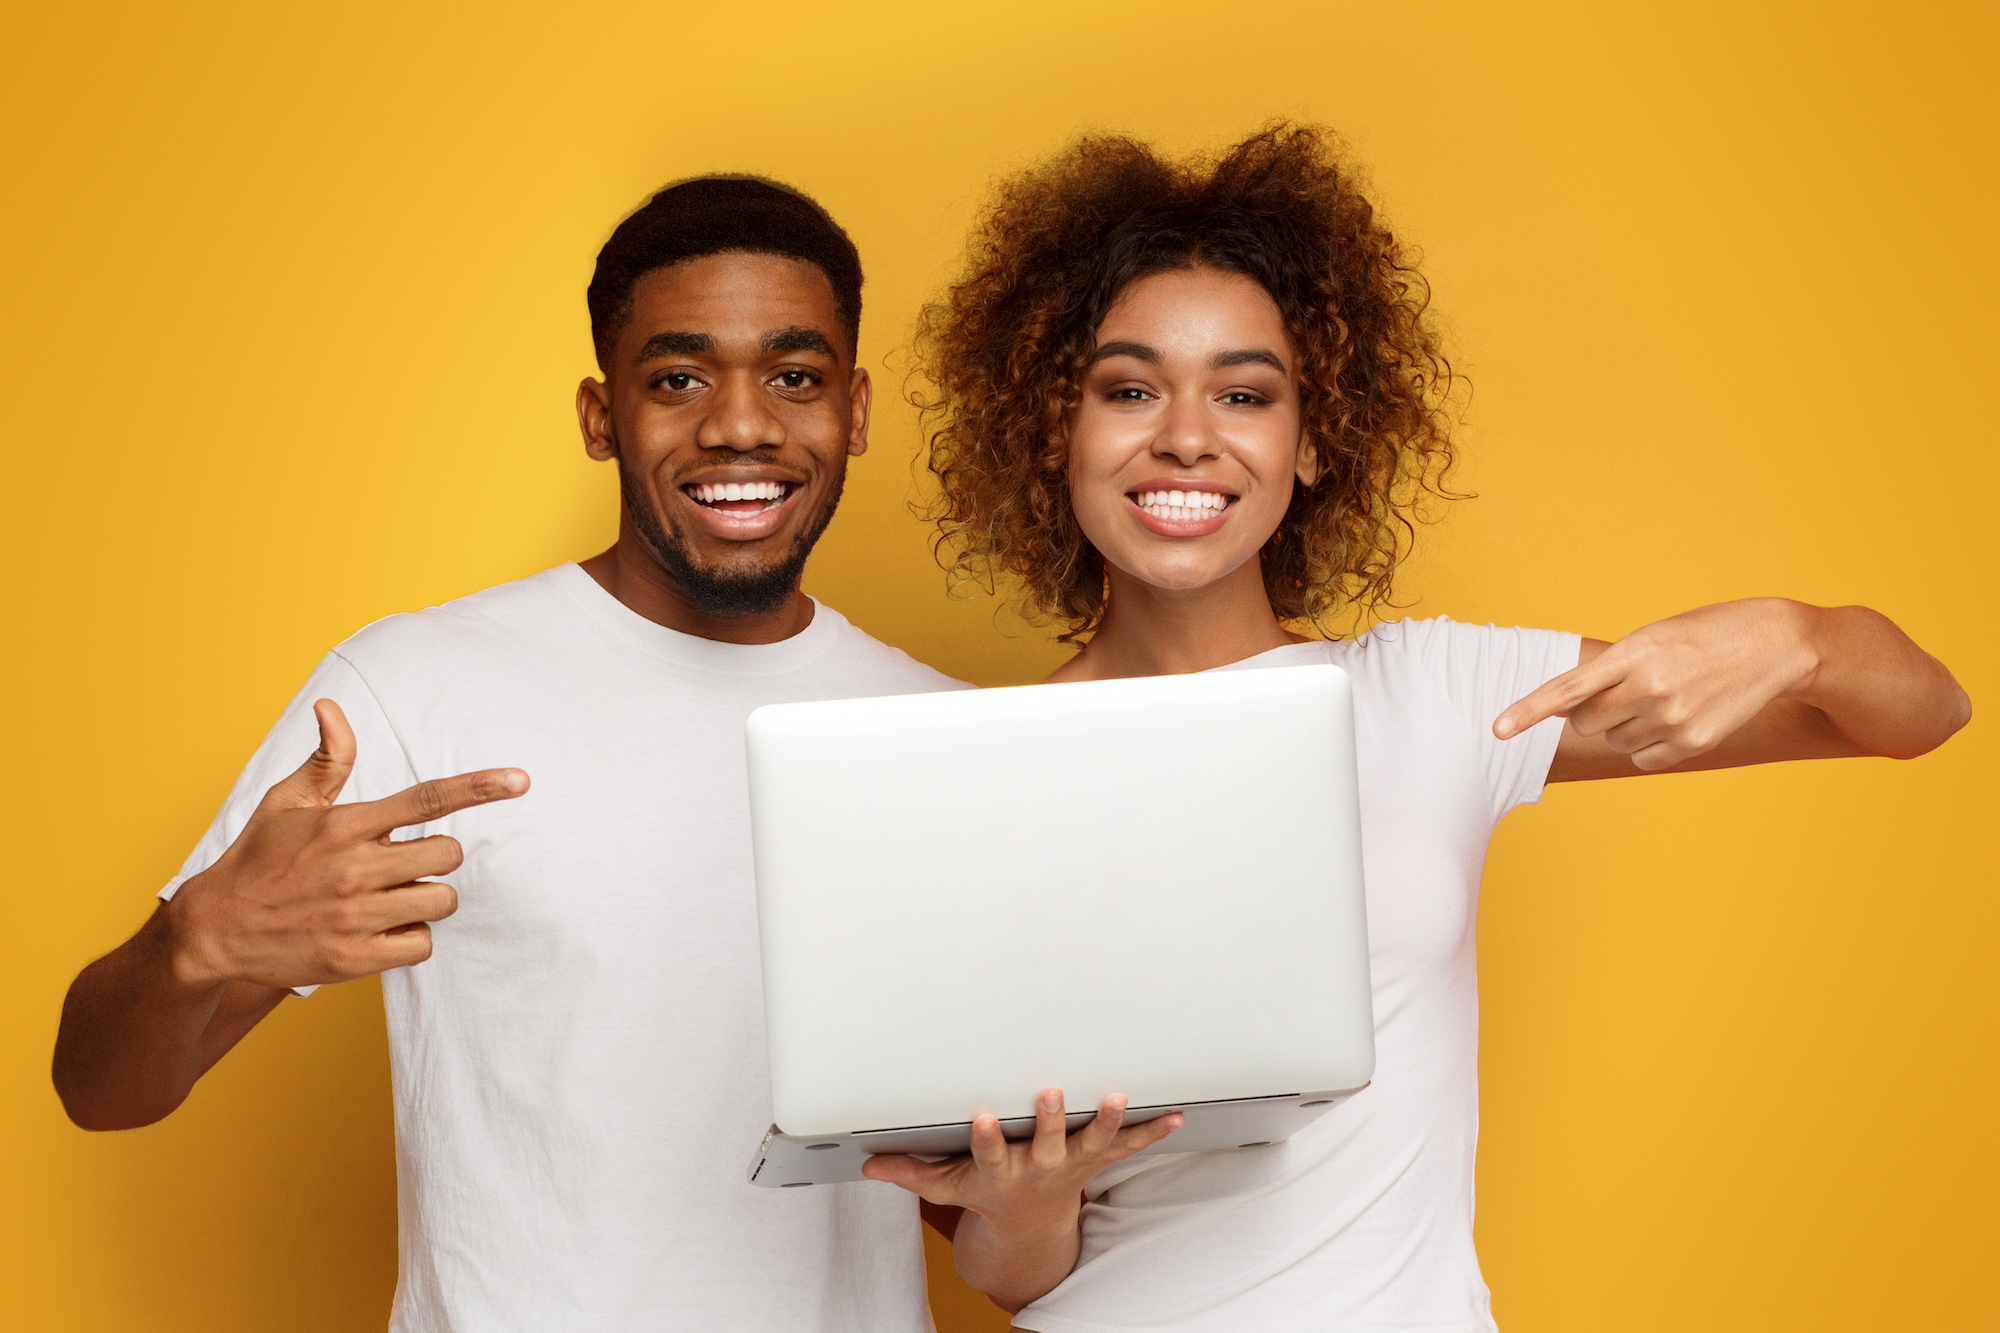 Top 5 laptops for students on successful black parenting magazine